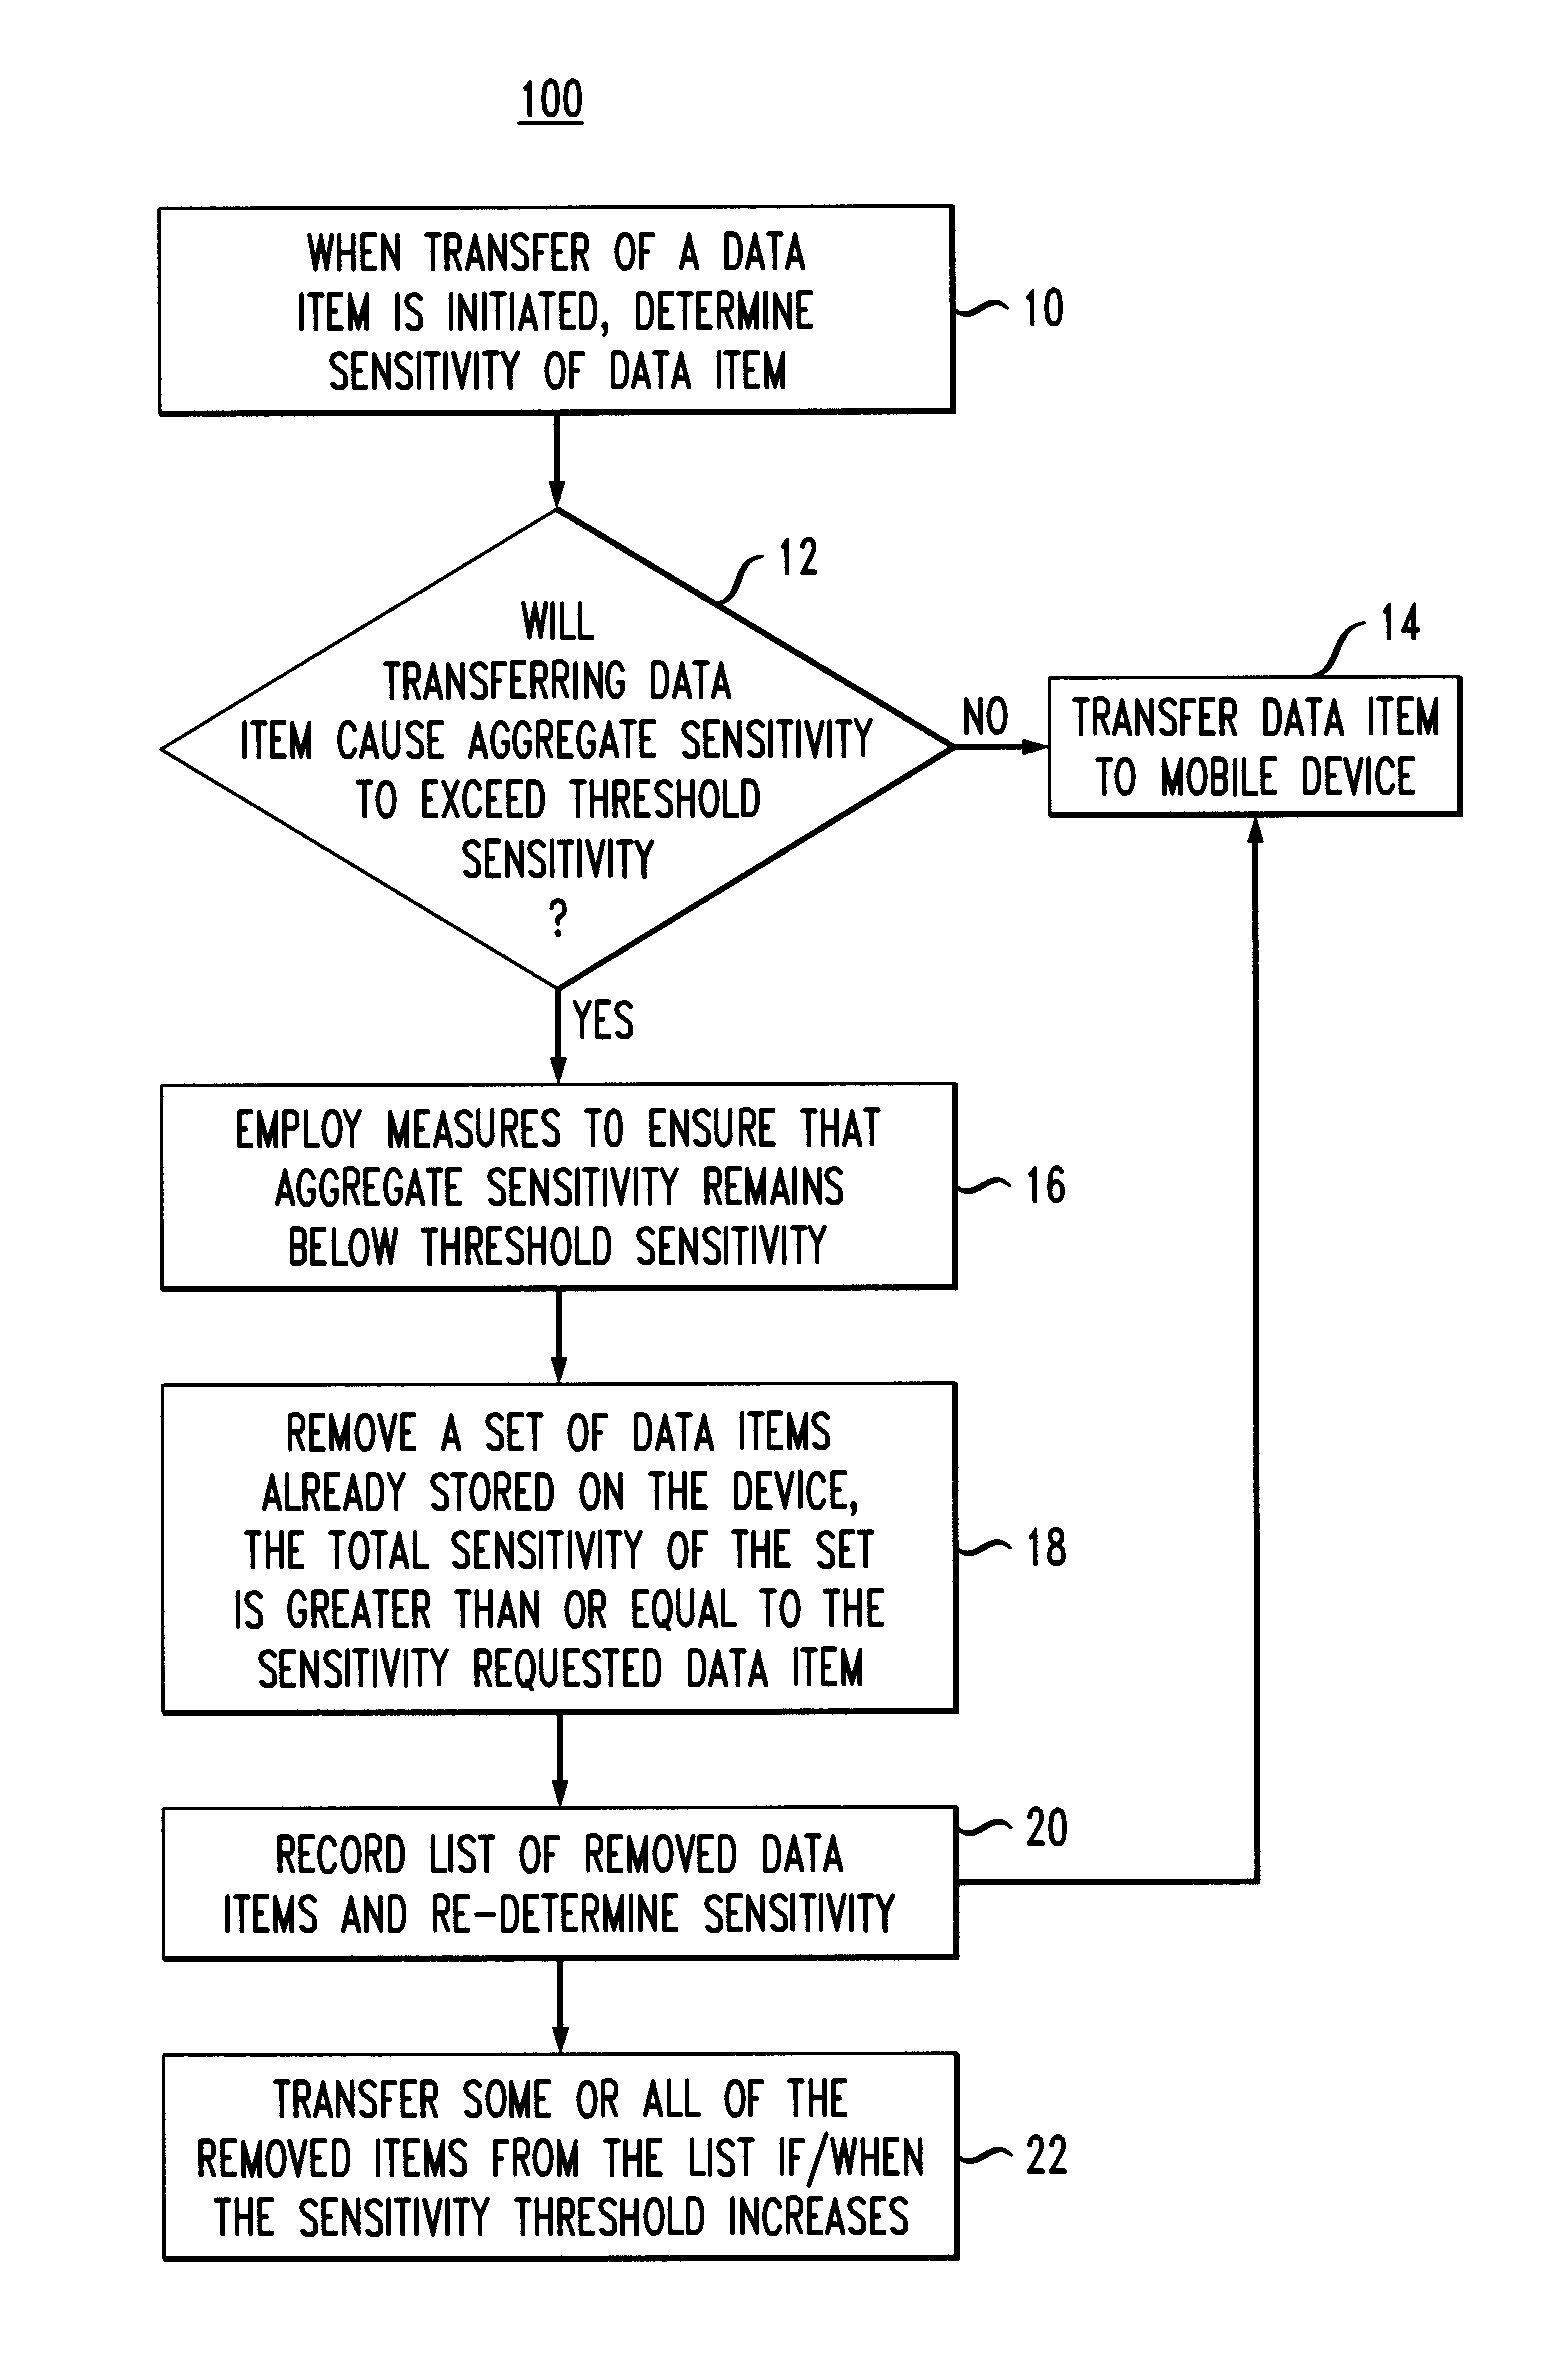 System and method to govern sensitive data exchange with mobile devices based on threshold sensitivity values